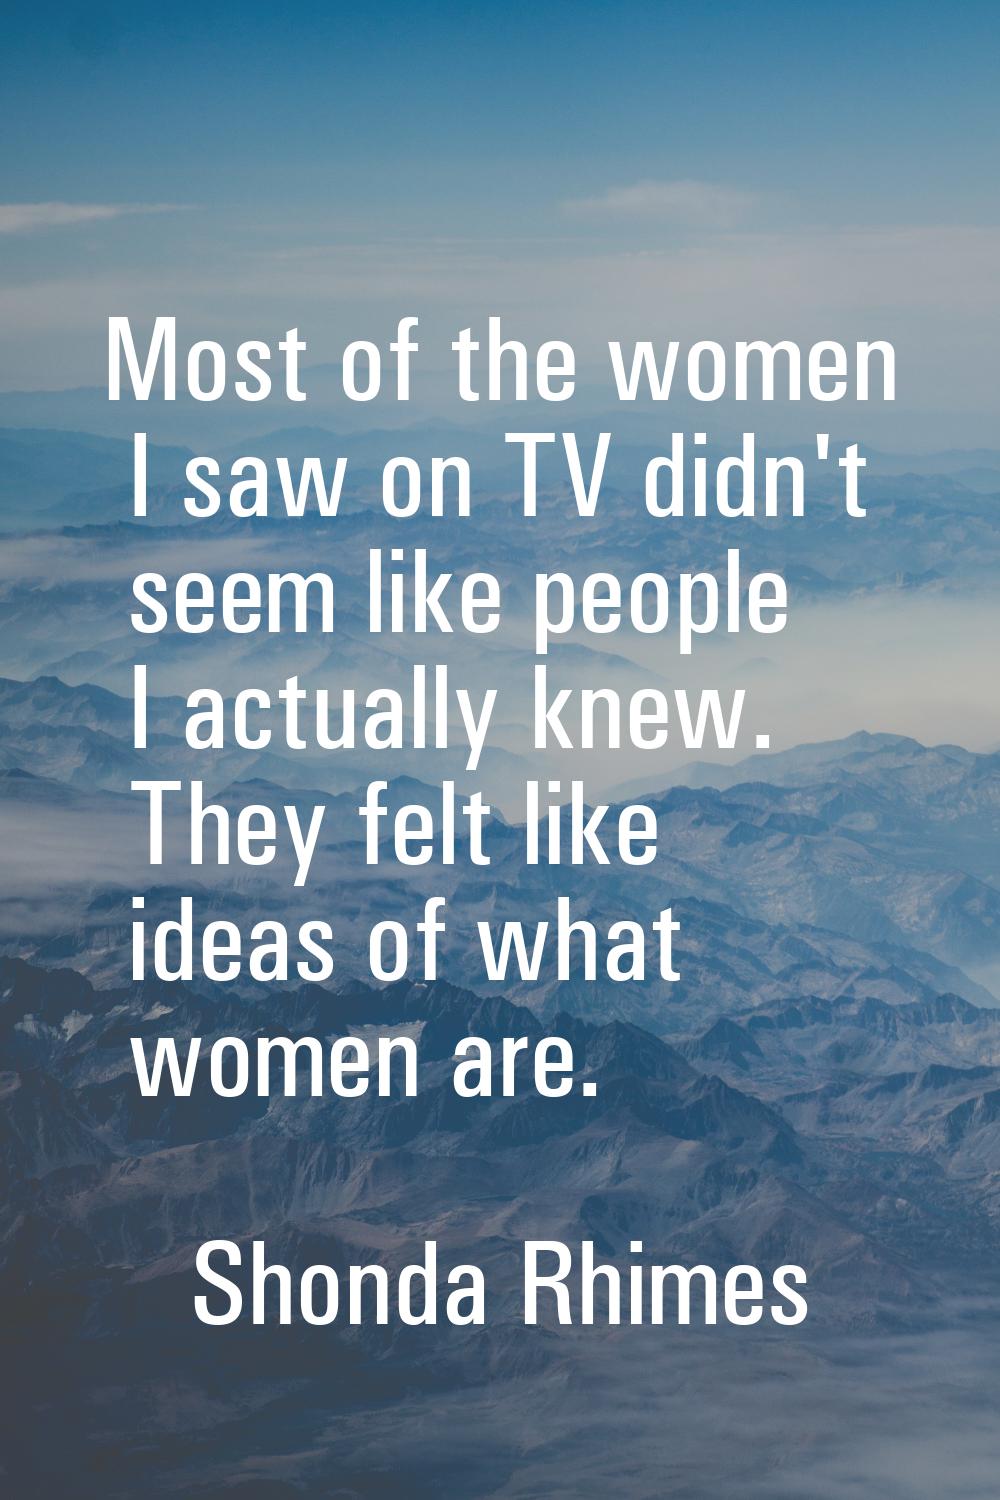 Most of the women I saw on TV didn't seem like people I actually knew. They felt like ideas of what